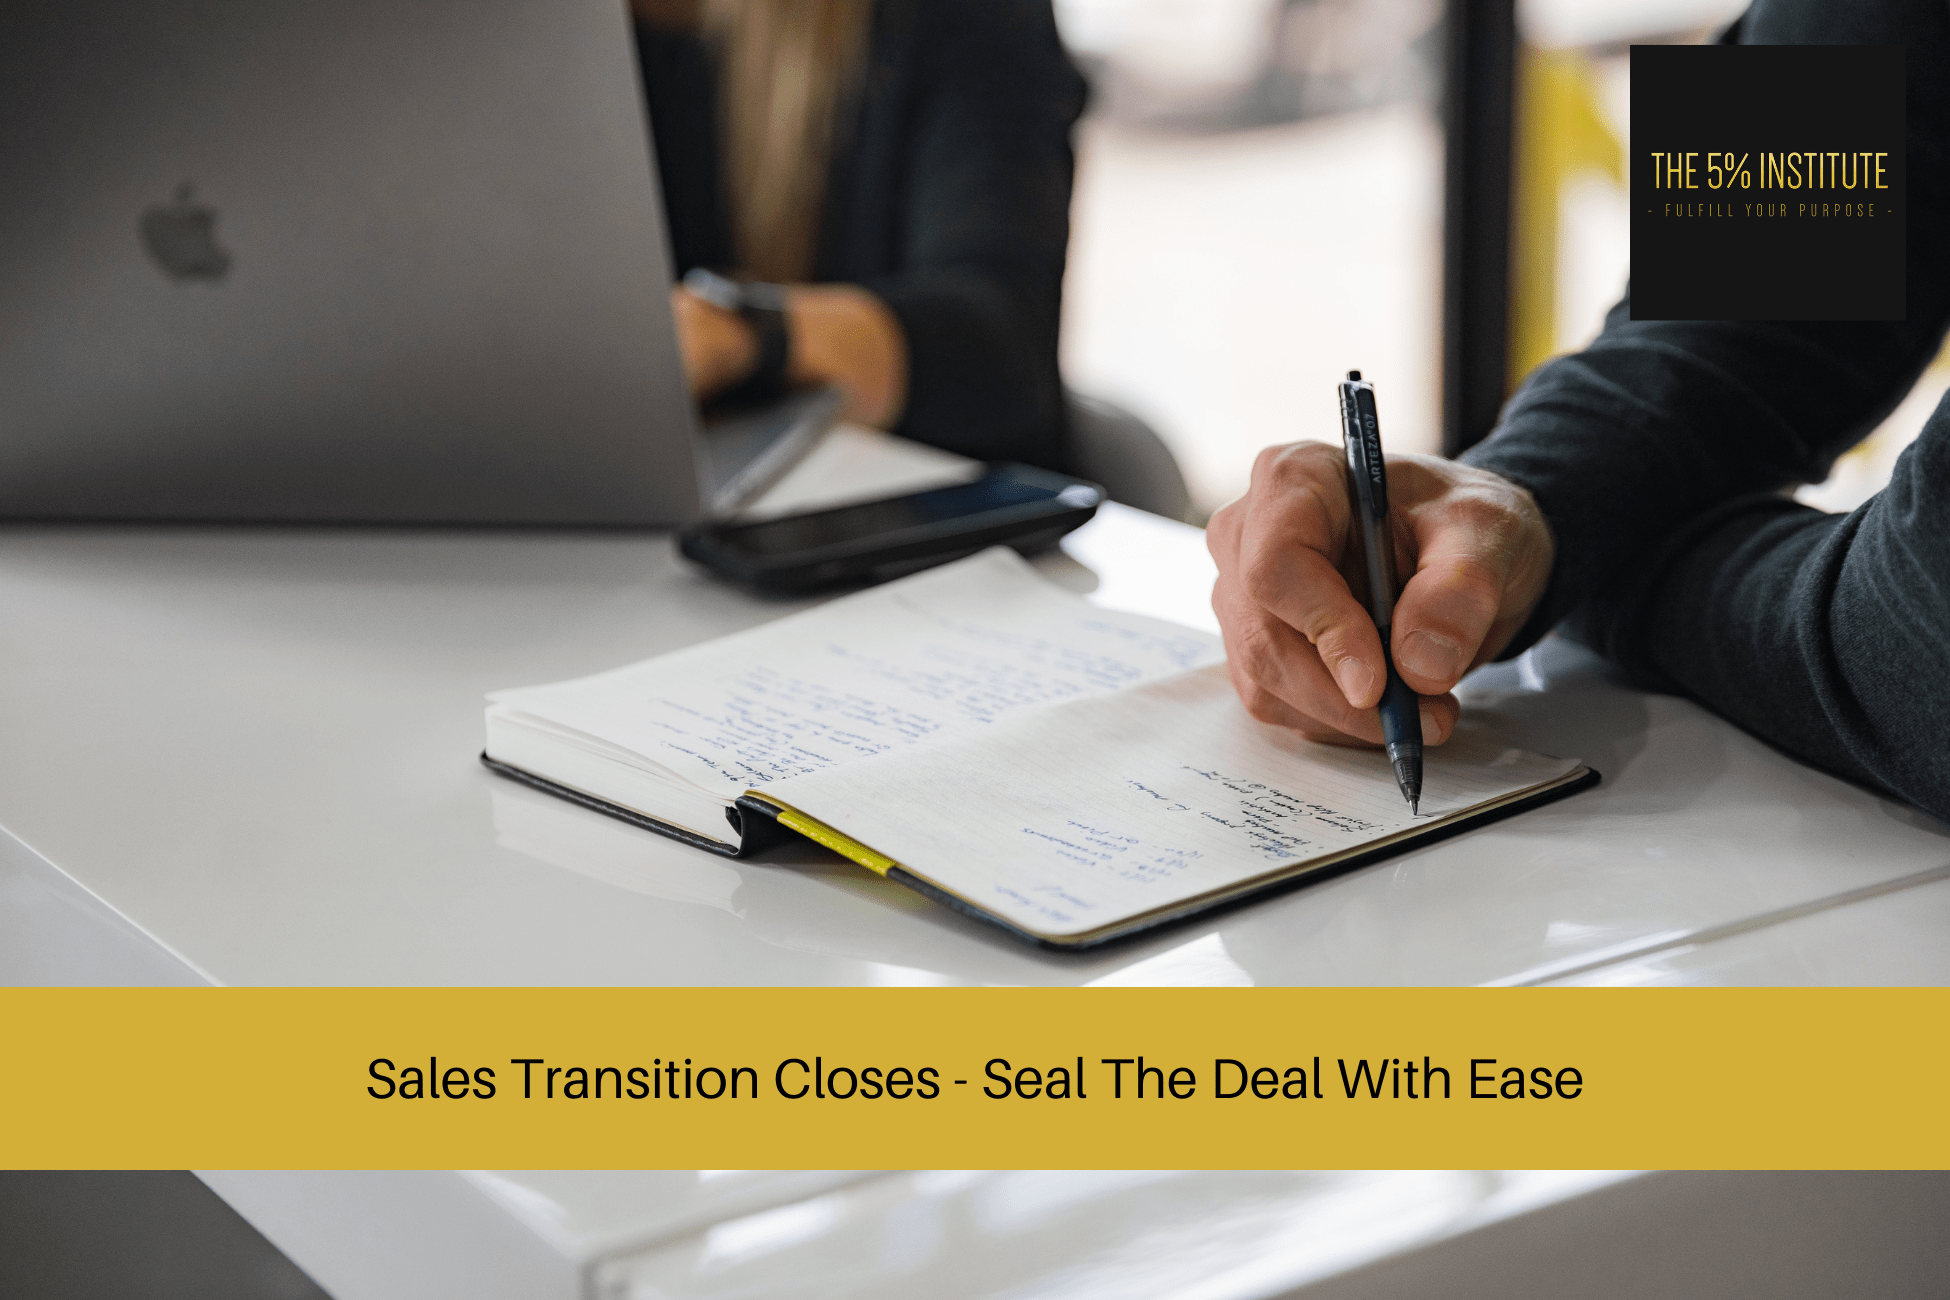 Sales Transition Closes - Seal The Deal With Ease